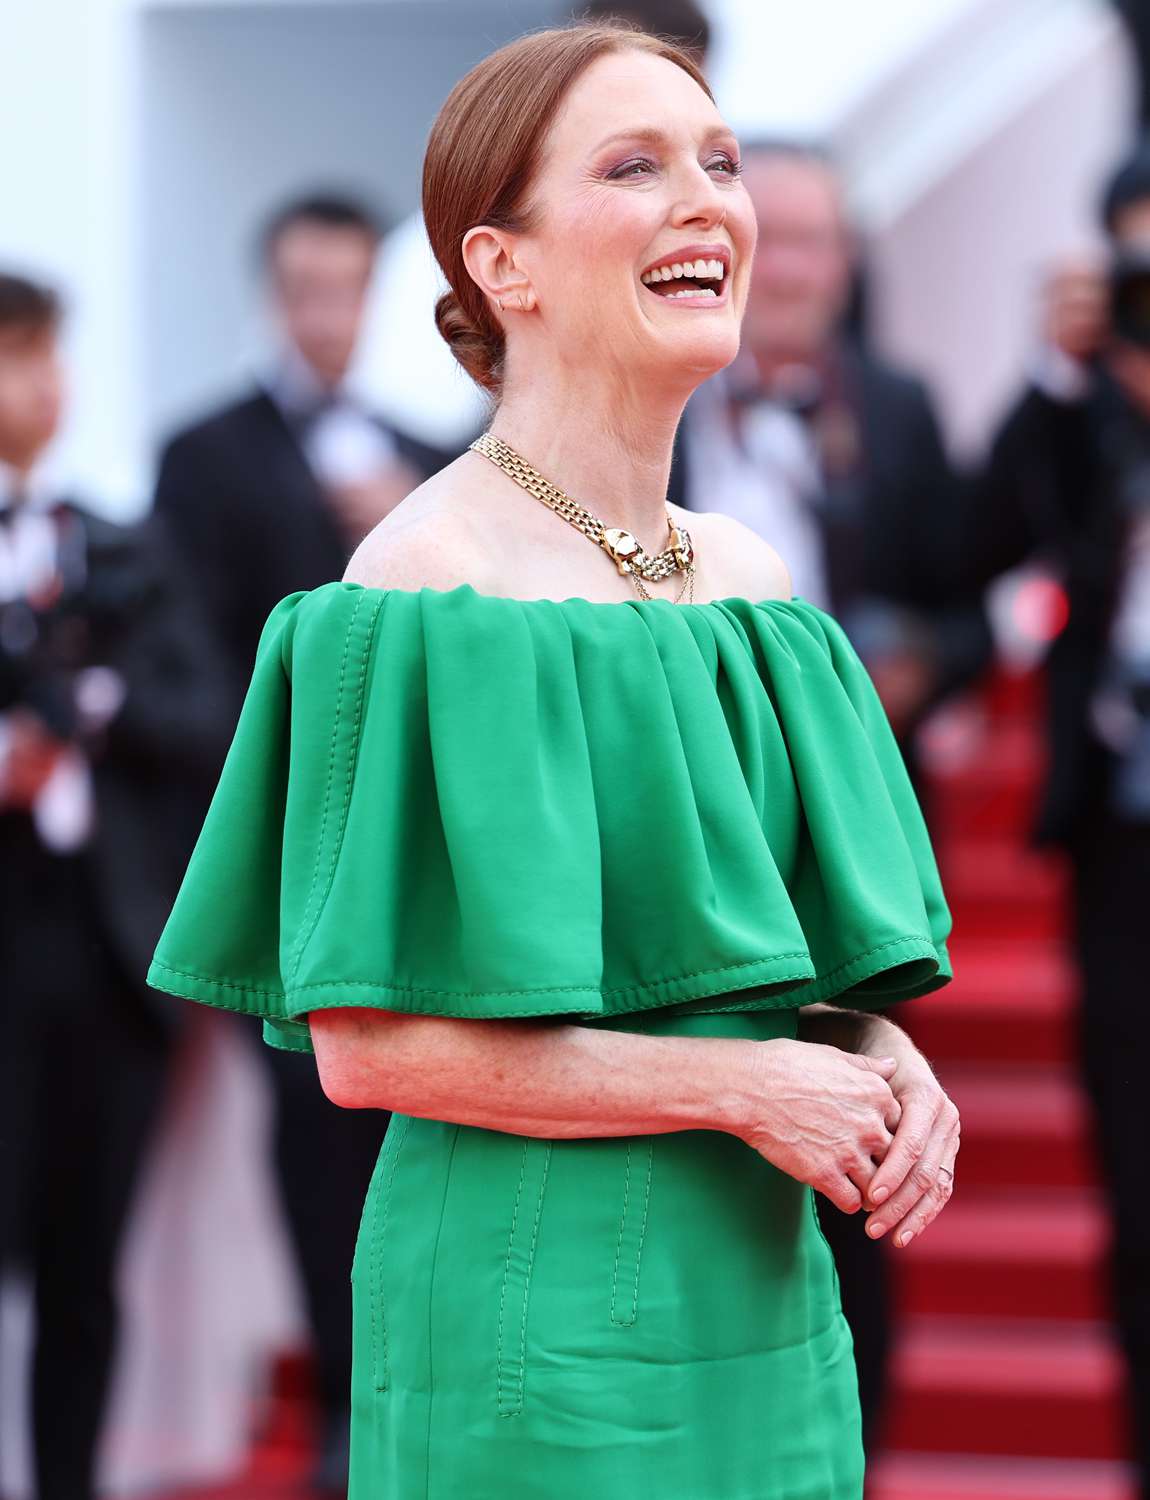 Julianne Moore attends the "Horizon: An American Saga" Red Carpet at the 77th annual Cannes Film Festival at 